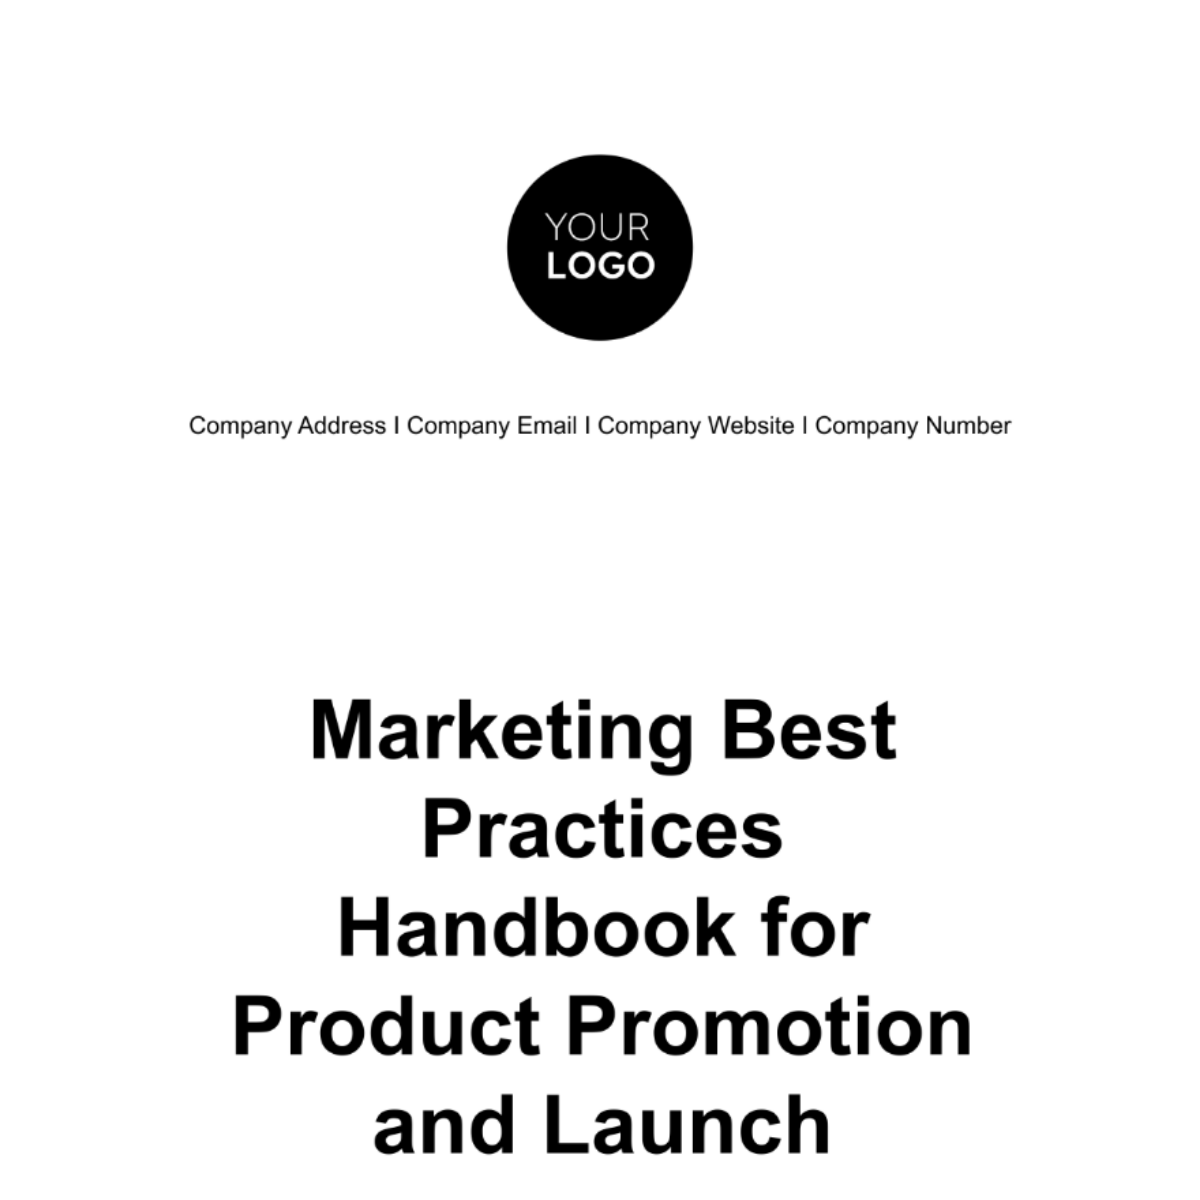 Marketing Best Practices Handbook for Product Promotion and Launch Template